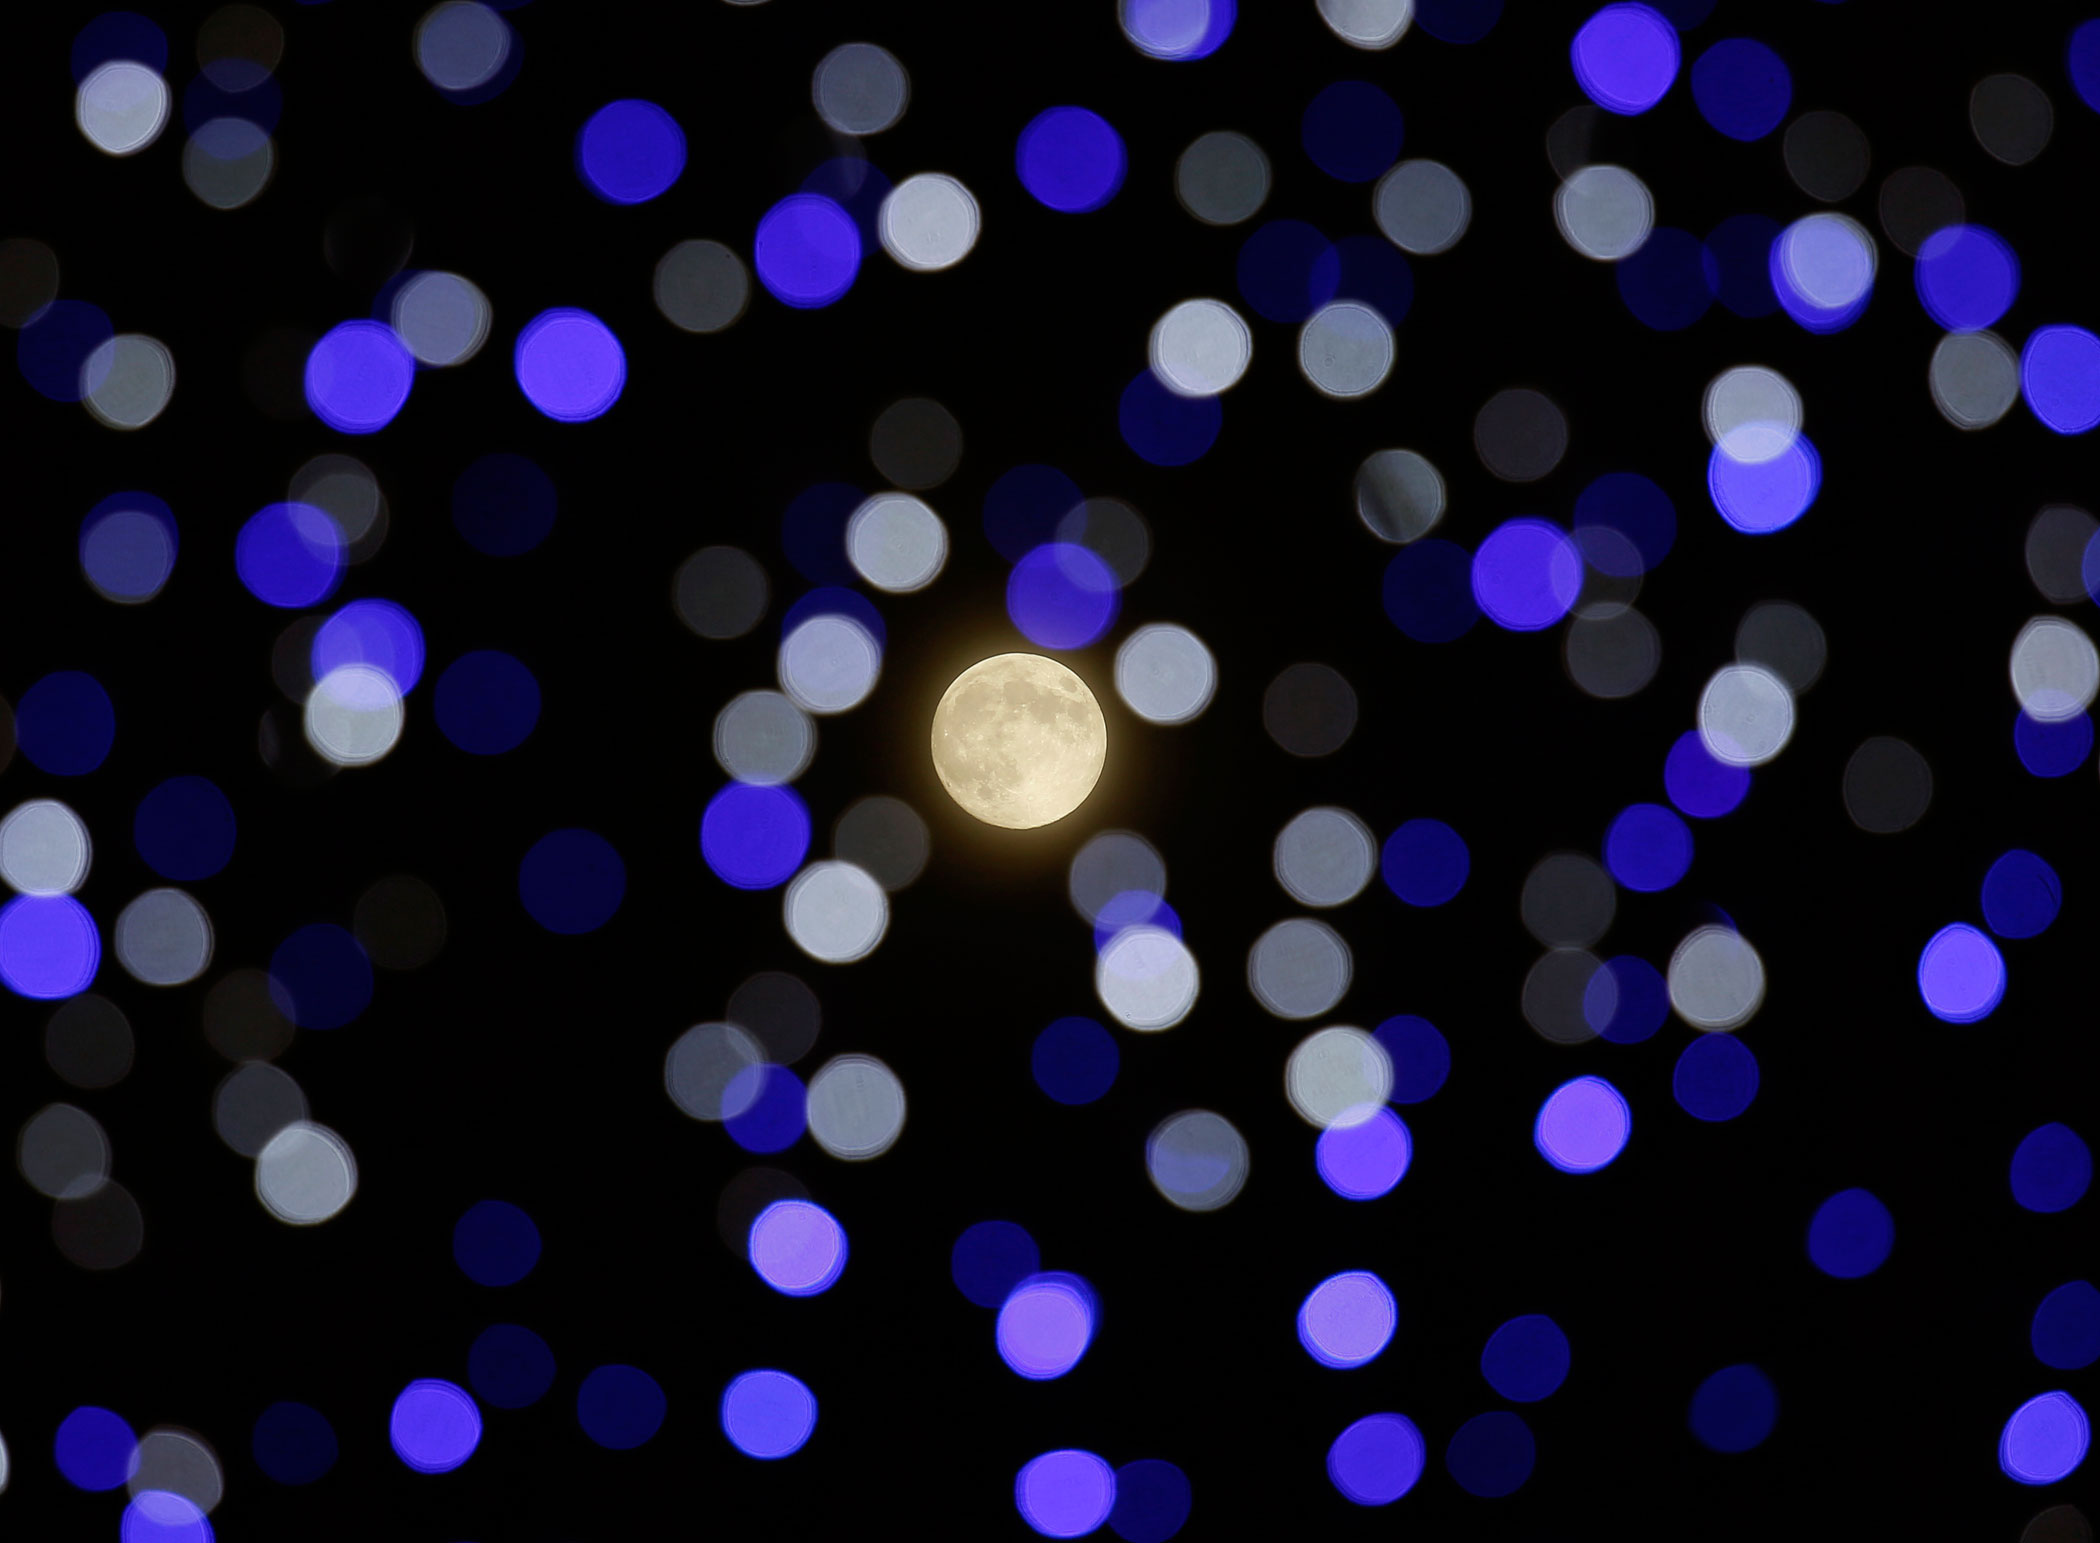 The harvest supermoon shines in between lighting installation during Mid-Autumn or Lantern Festival at Hong Kong's Victoria Park on Sept. 8, 2014.